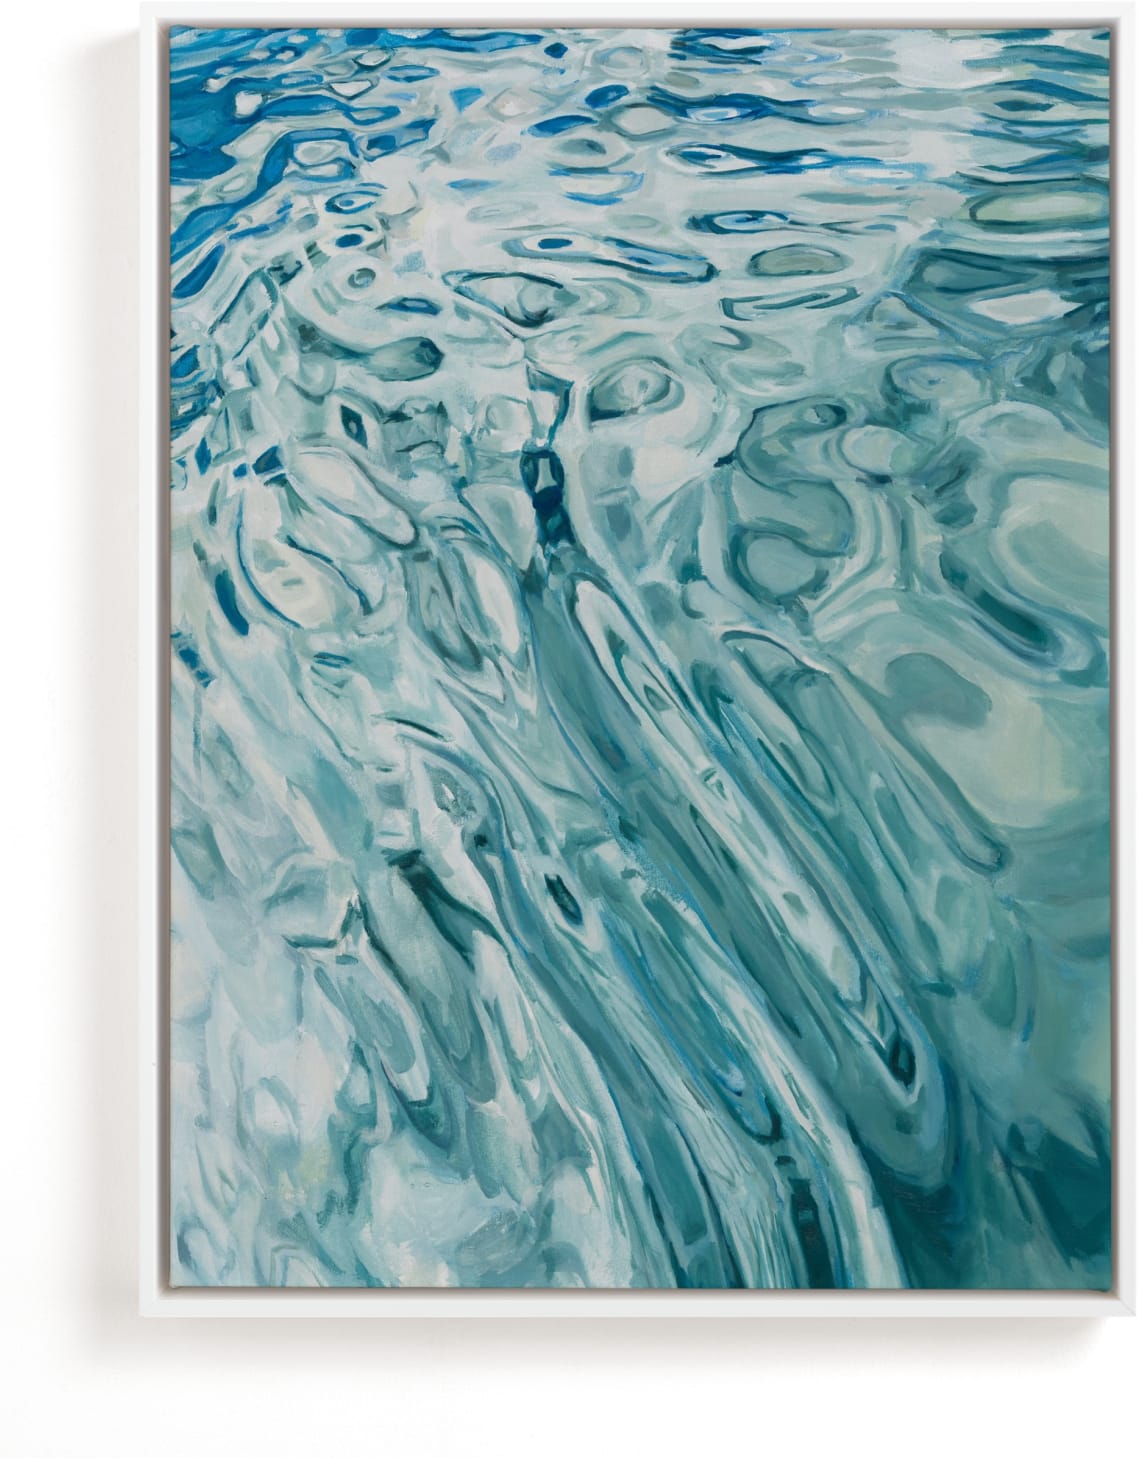 This is a blue art by Kelly Johnston called Slip.